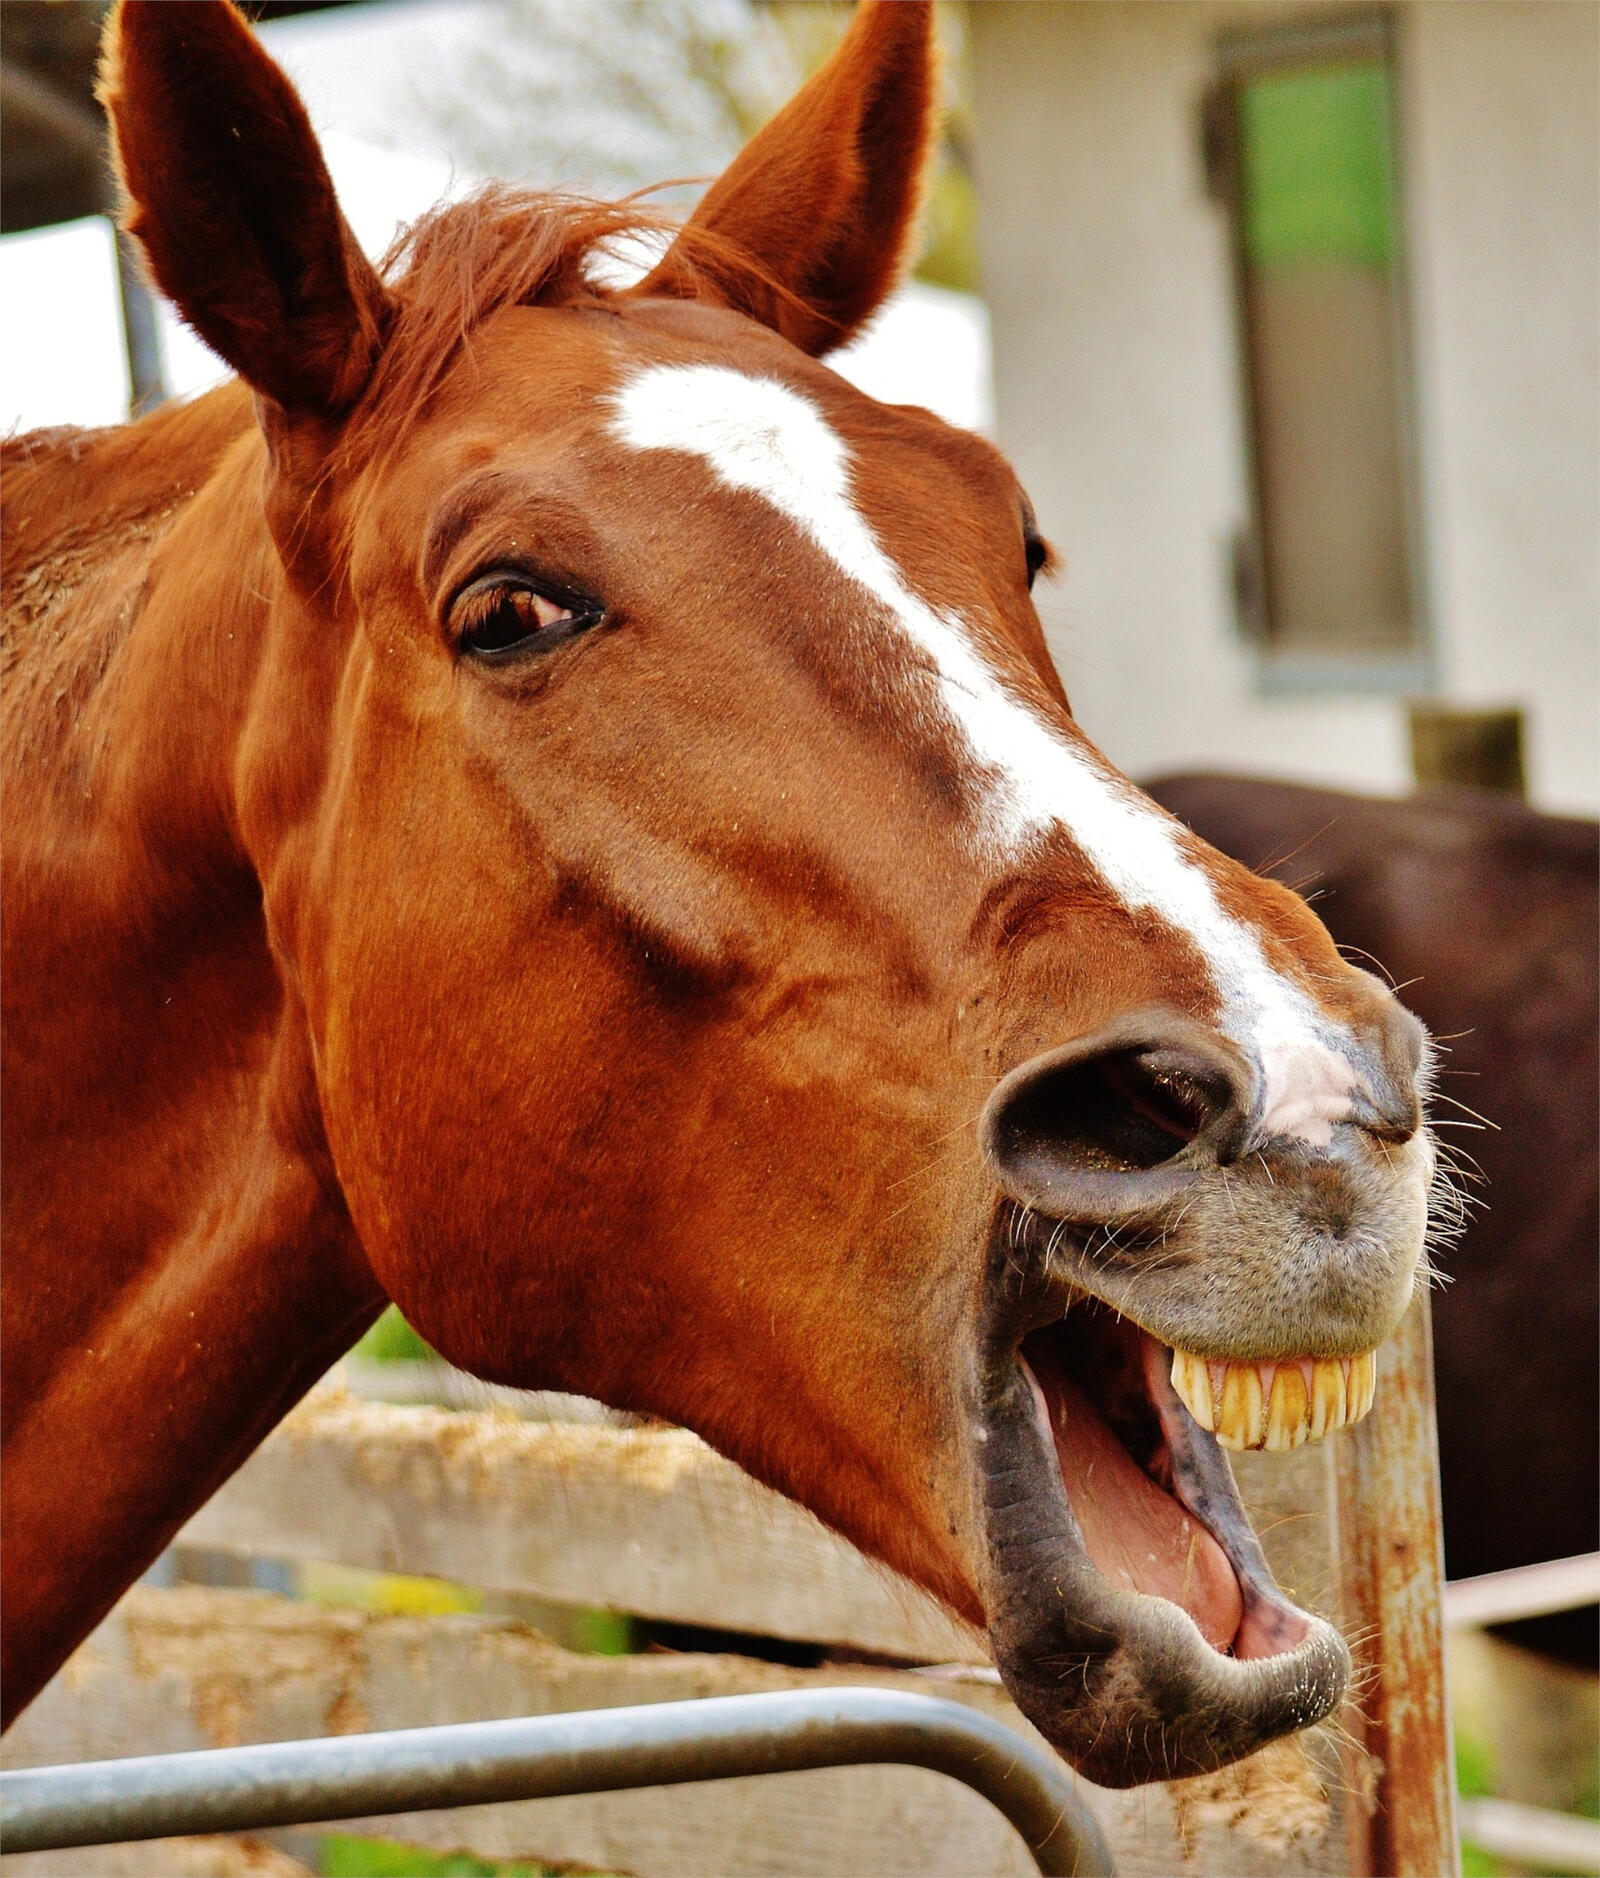 Wallpapers horse muzzle grin on the desktop